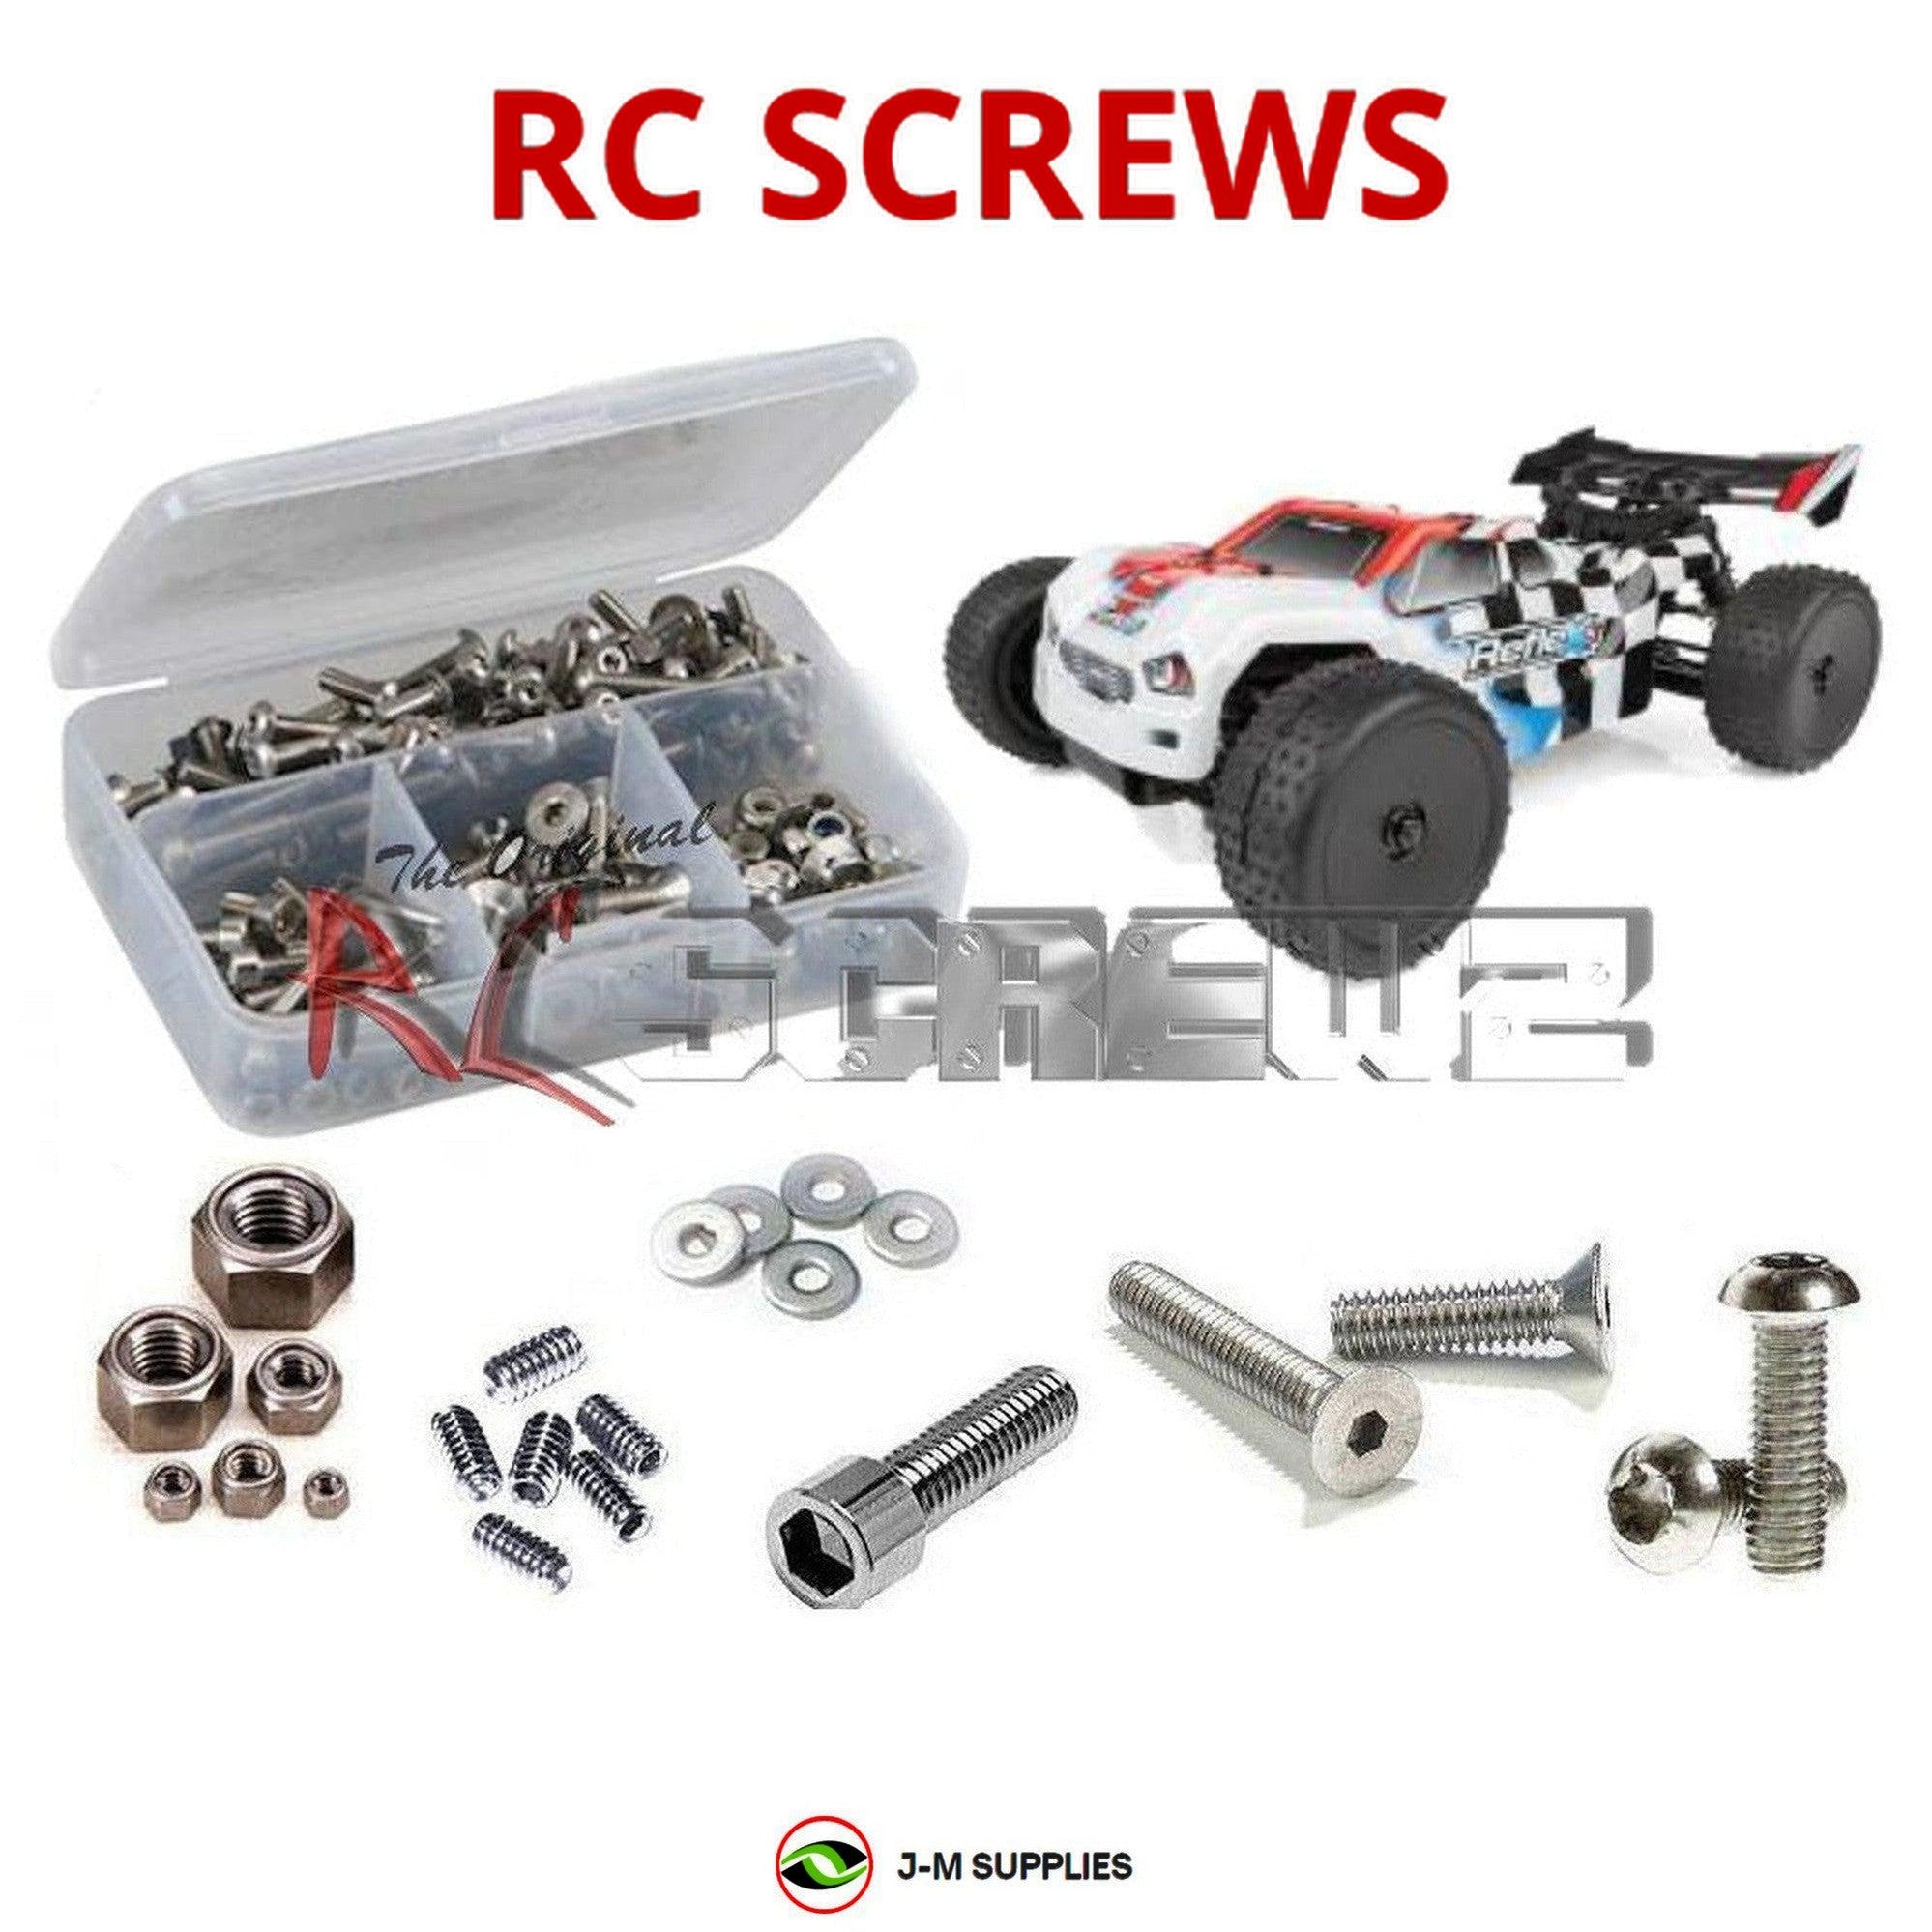 RCScrewZ Stainless Screw Kit ass099 for Associated Reflex 14T 1/14 Trugy 20176/C - Picture 1 of 12